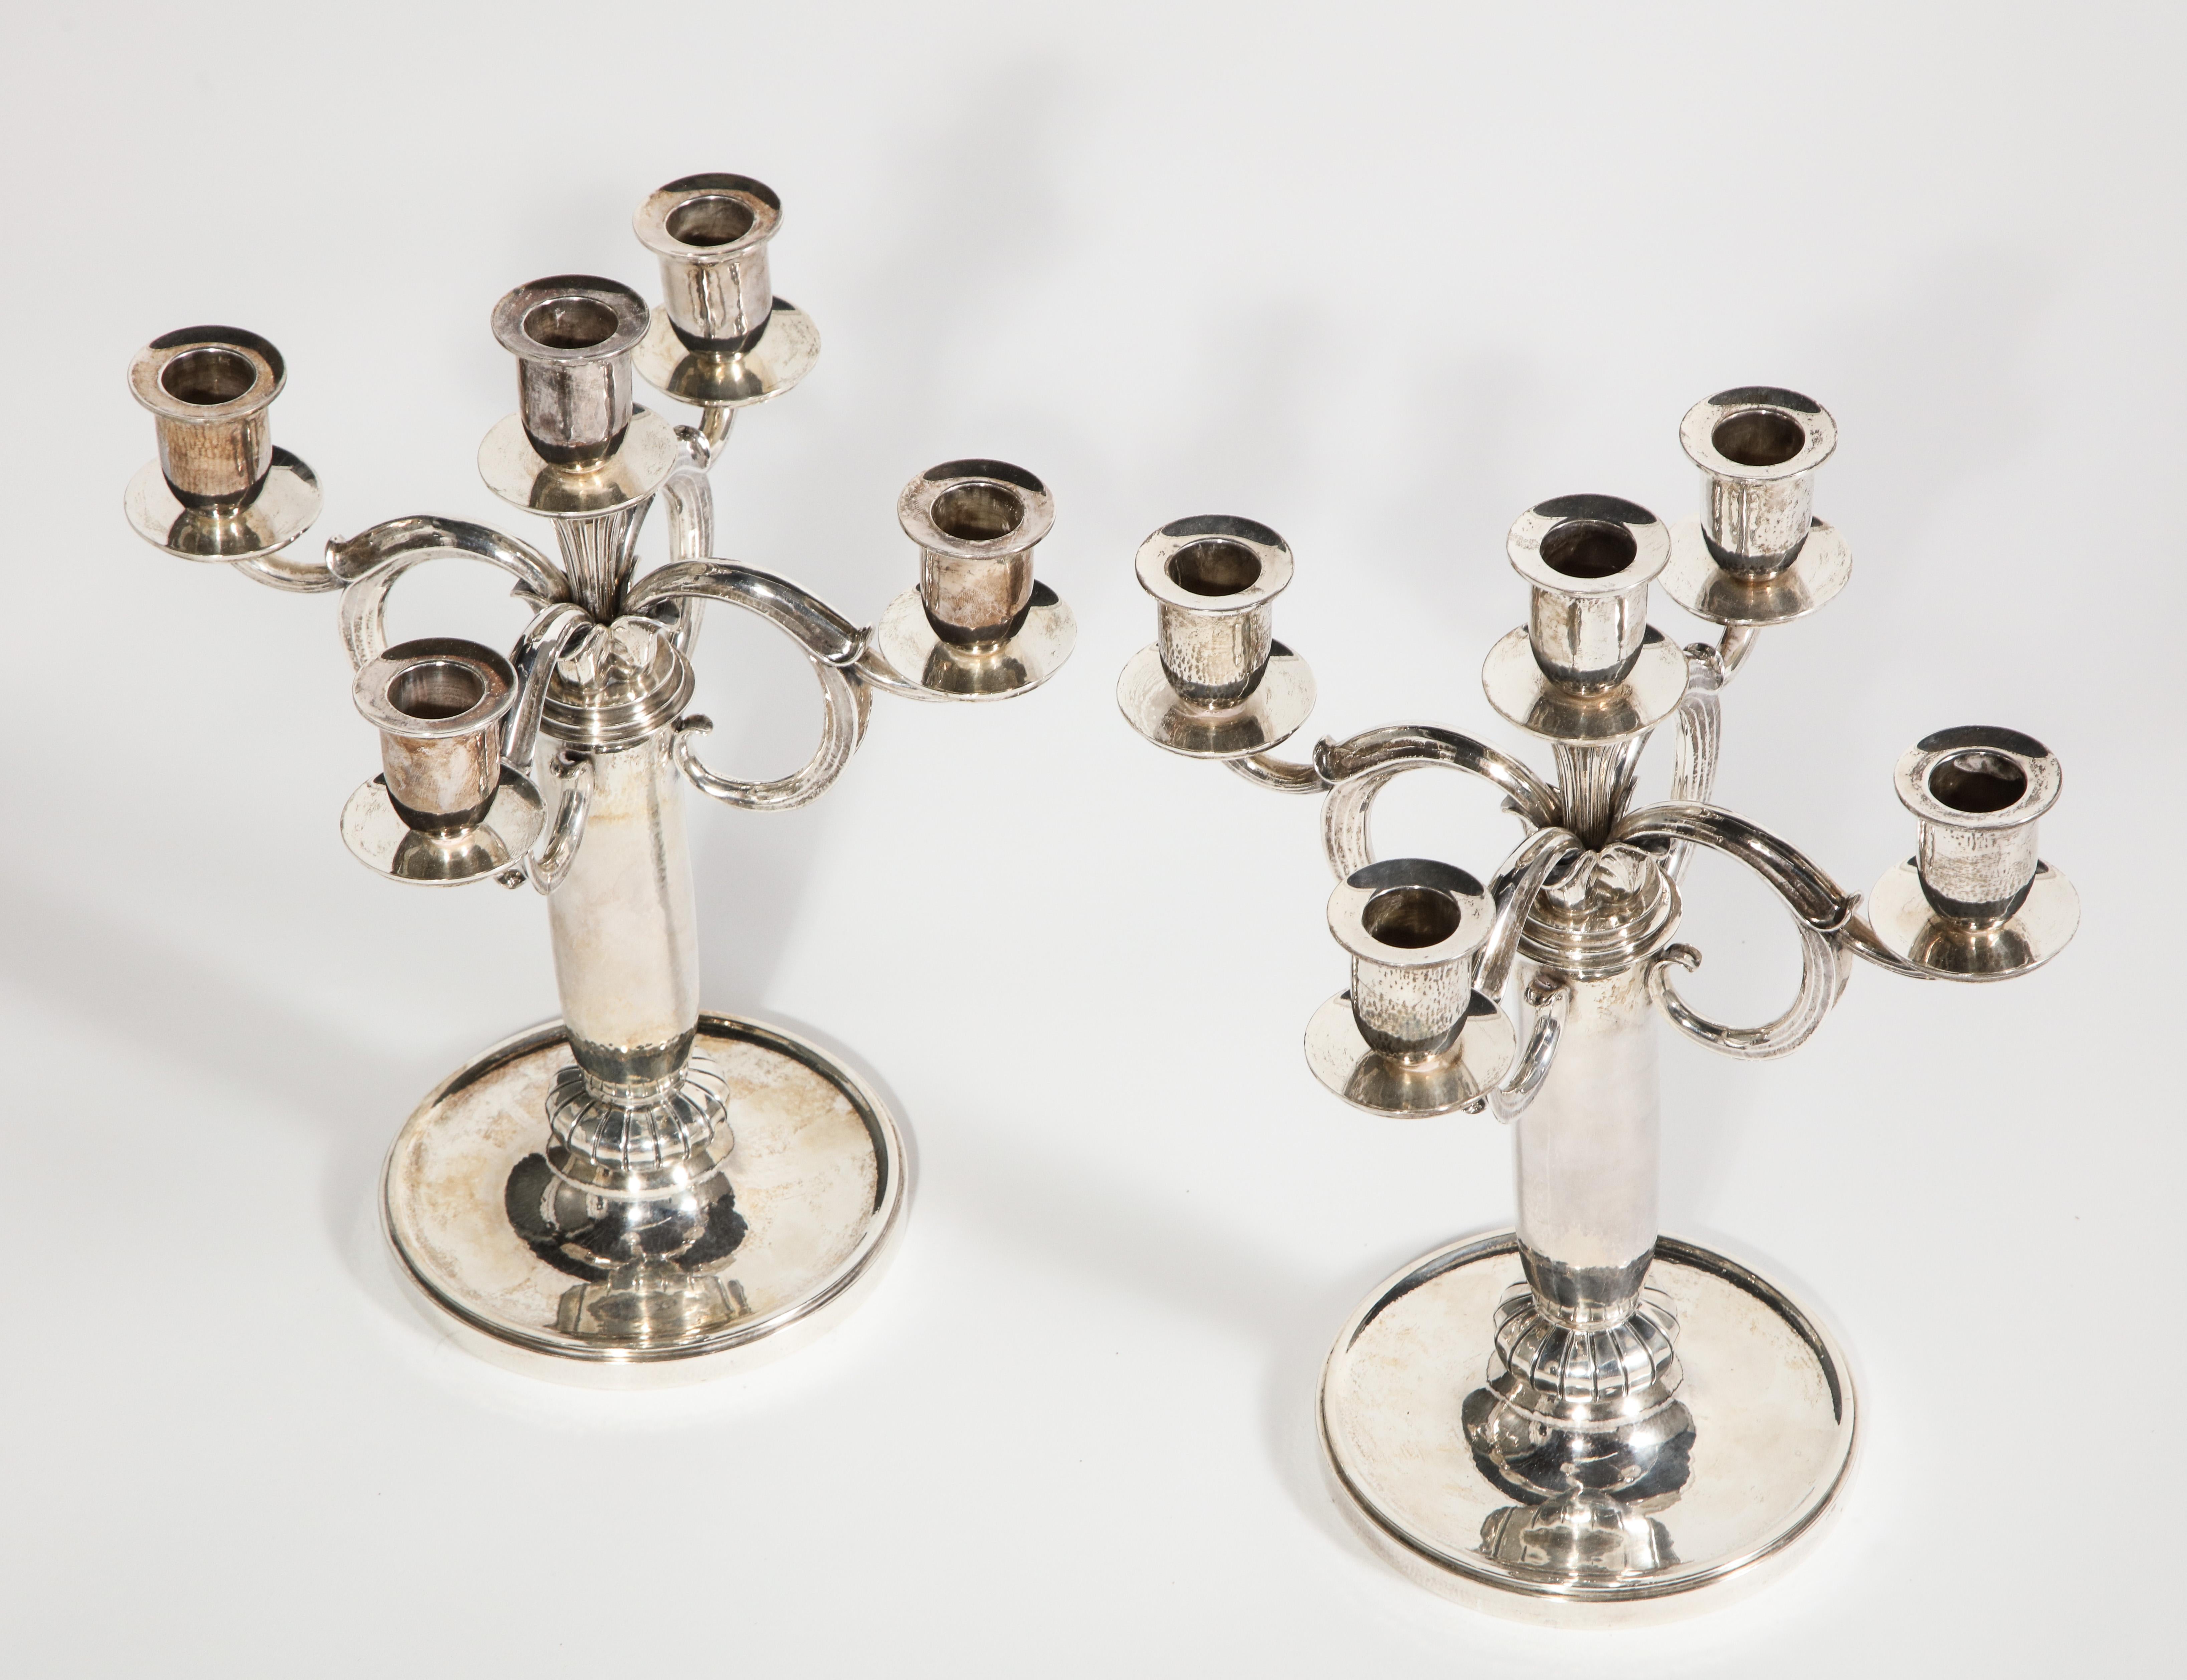 Danish sterling silver modernist five-light candelabras, pair, circa 1932, by Evald Nielsen, Copenhagen

Each with all-over hand-hammered surface, the circular concave foot issuing a shaped standard with a low fluted know with four stylized scroll